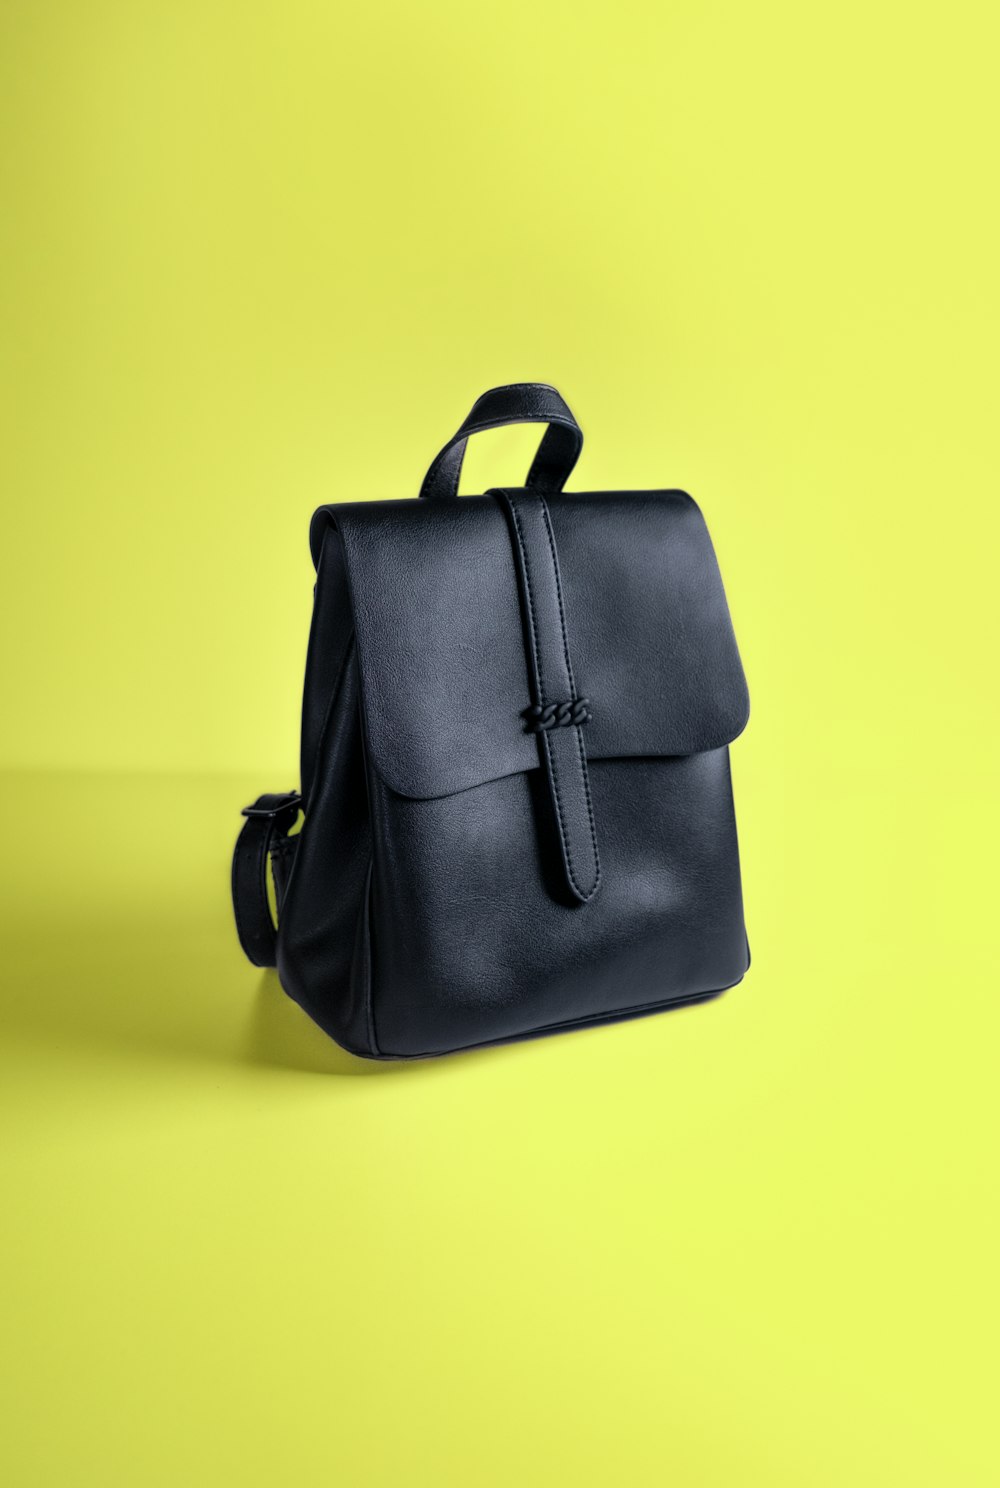 a black leather backpack on a yellow background